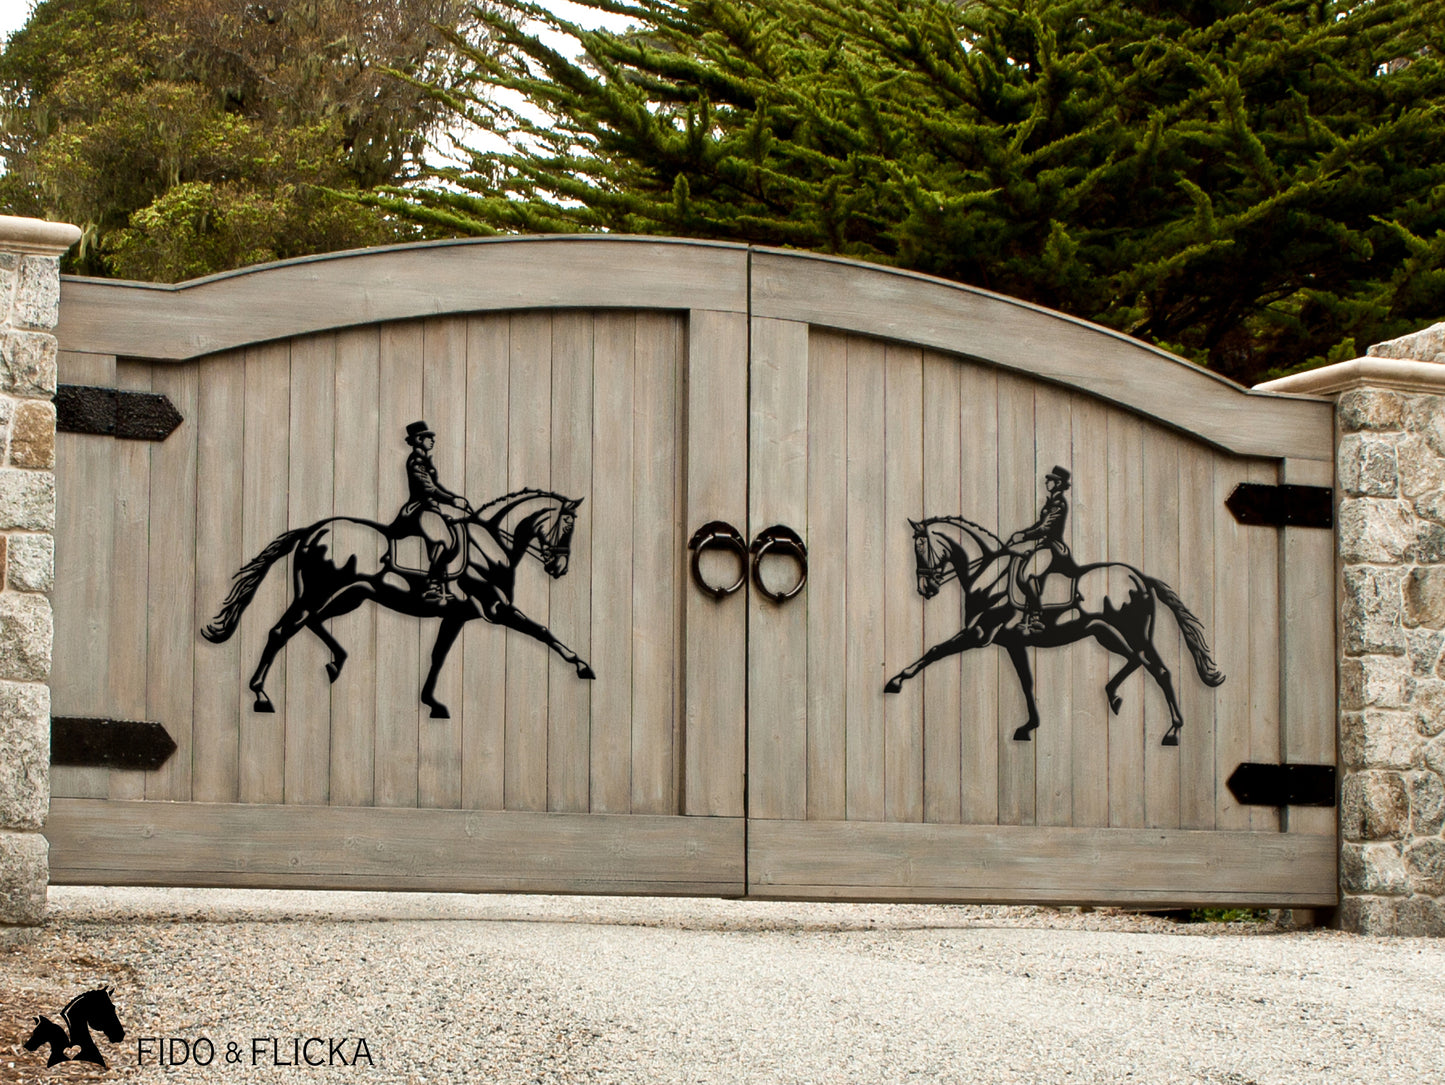 Metal dressage horses on wooden driveway gate